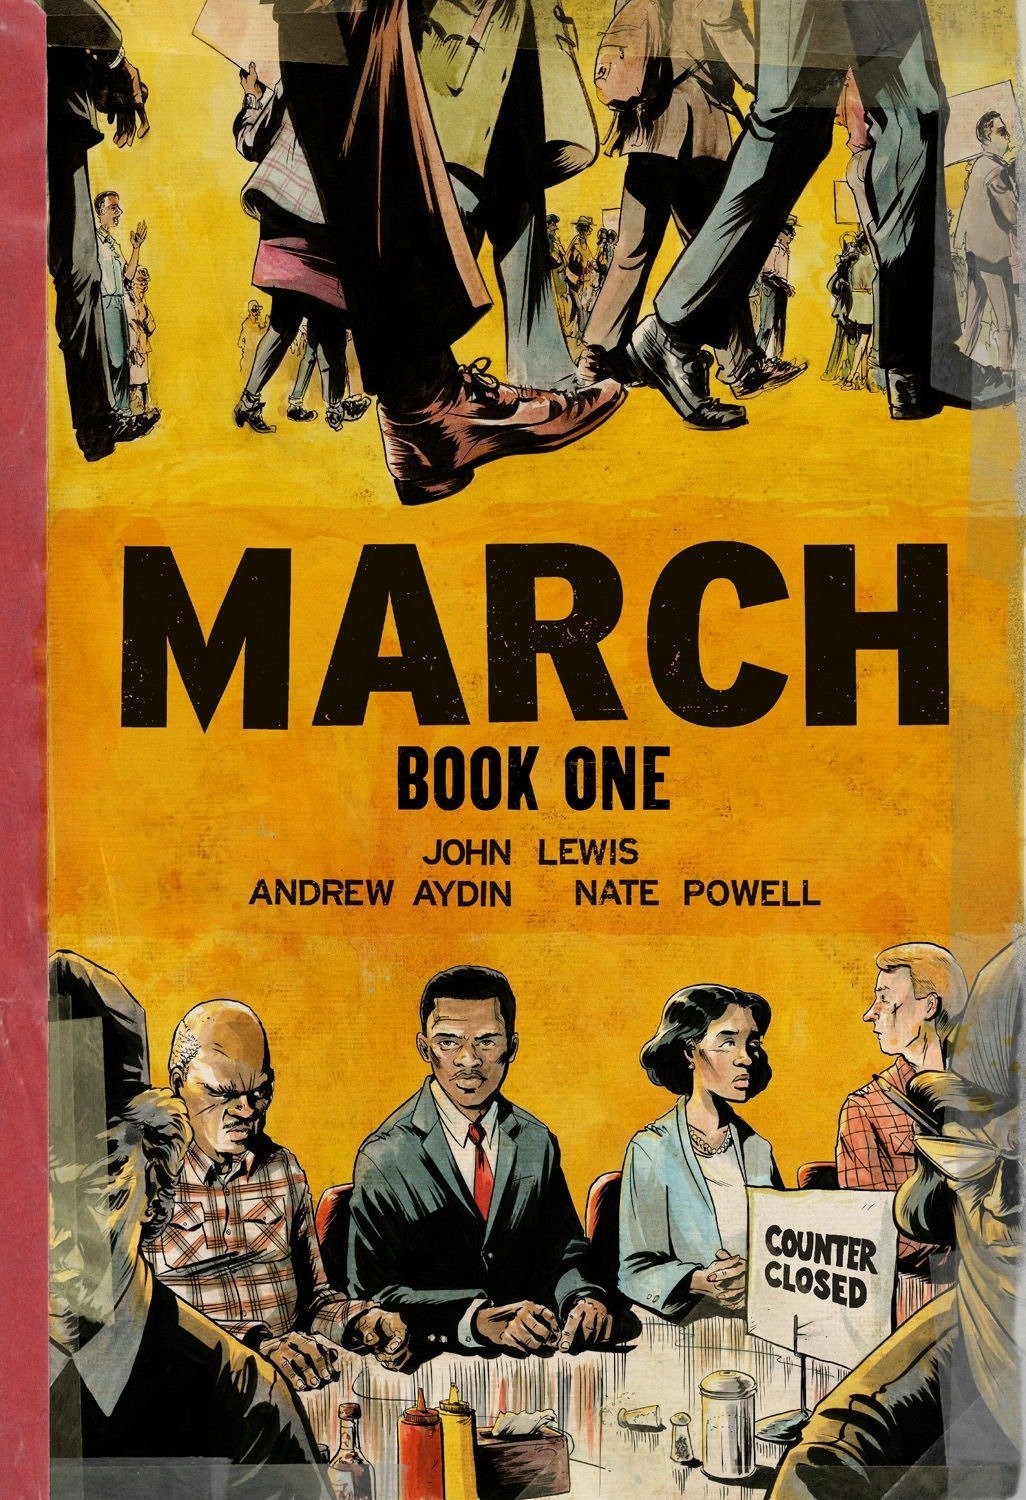 Cover of "March Book 1" by John Lewis